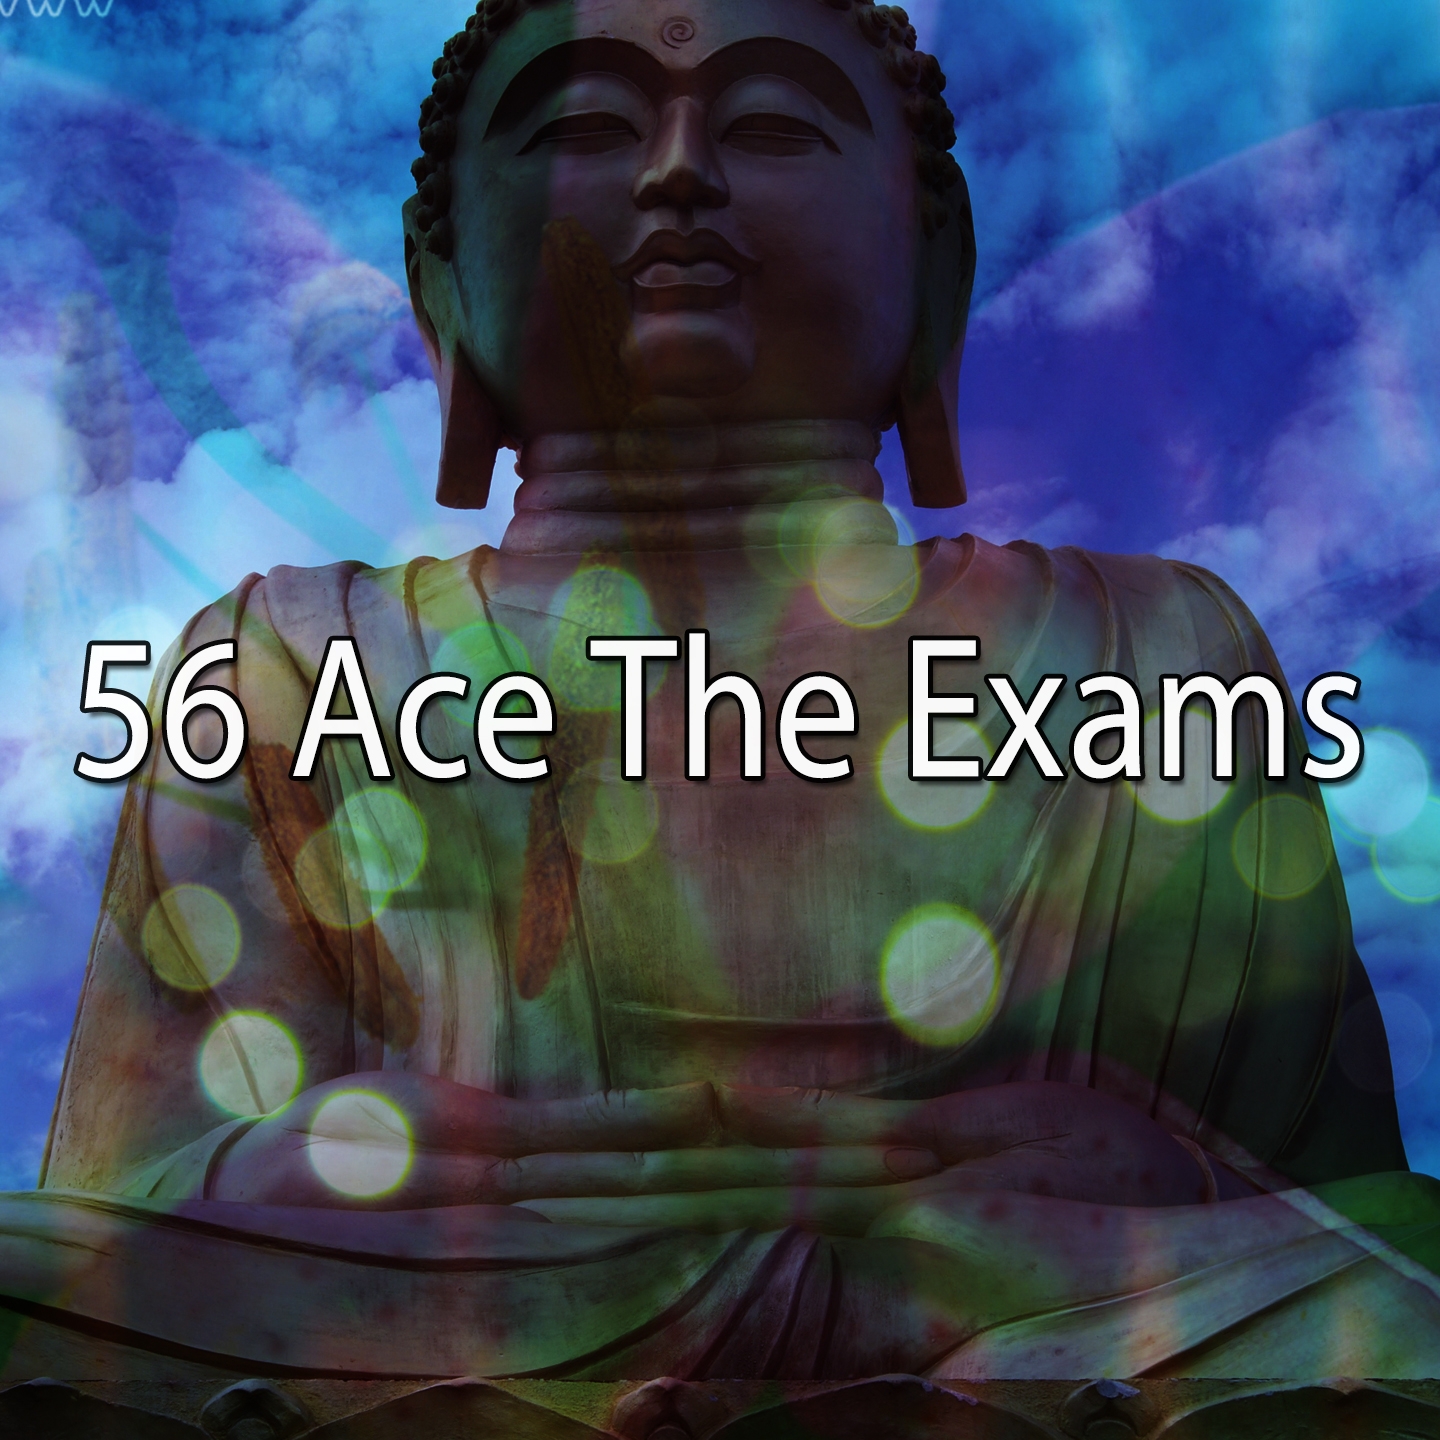 56 Ace The Exams